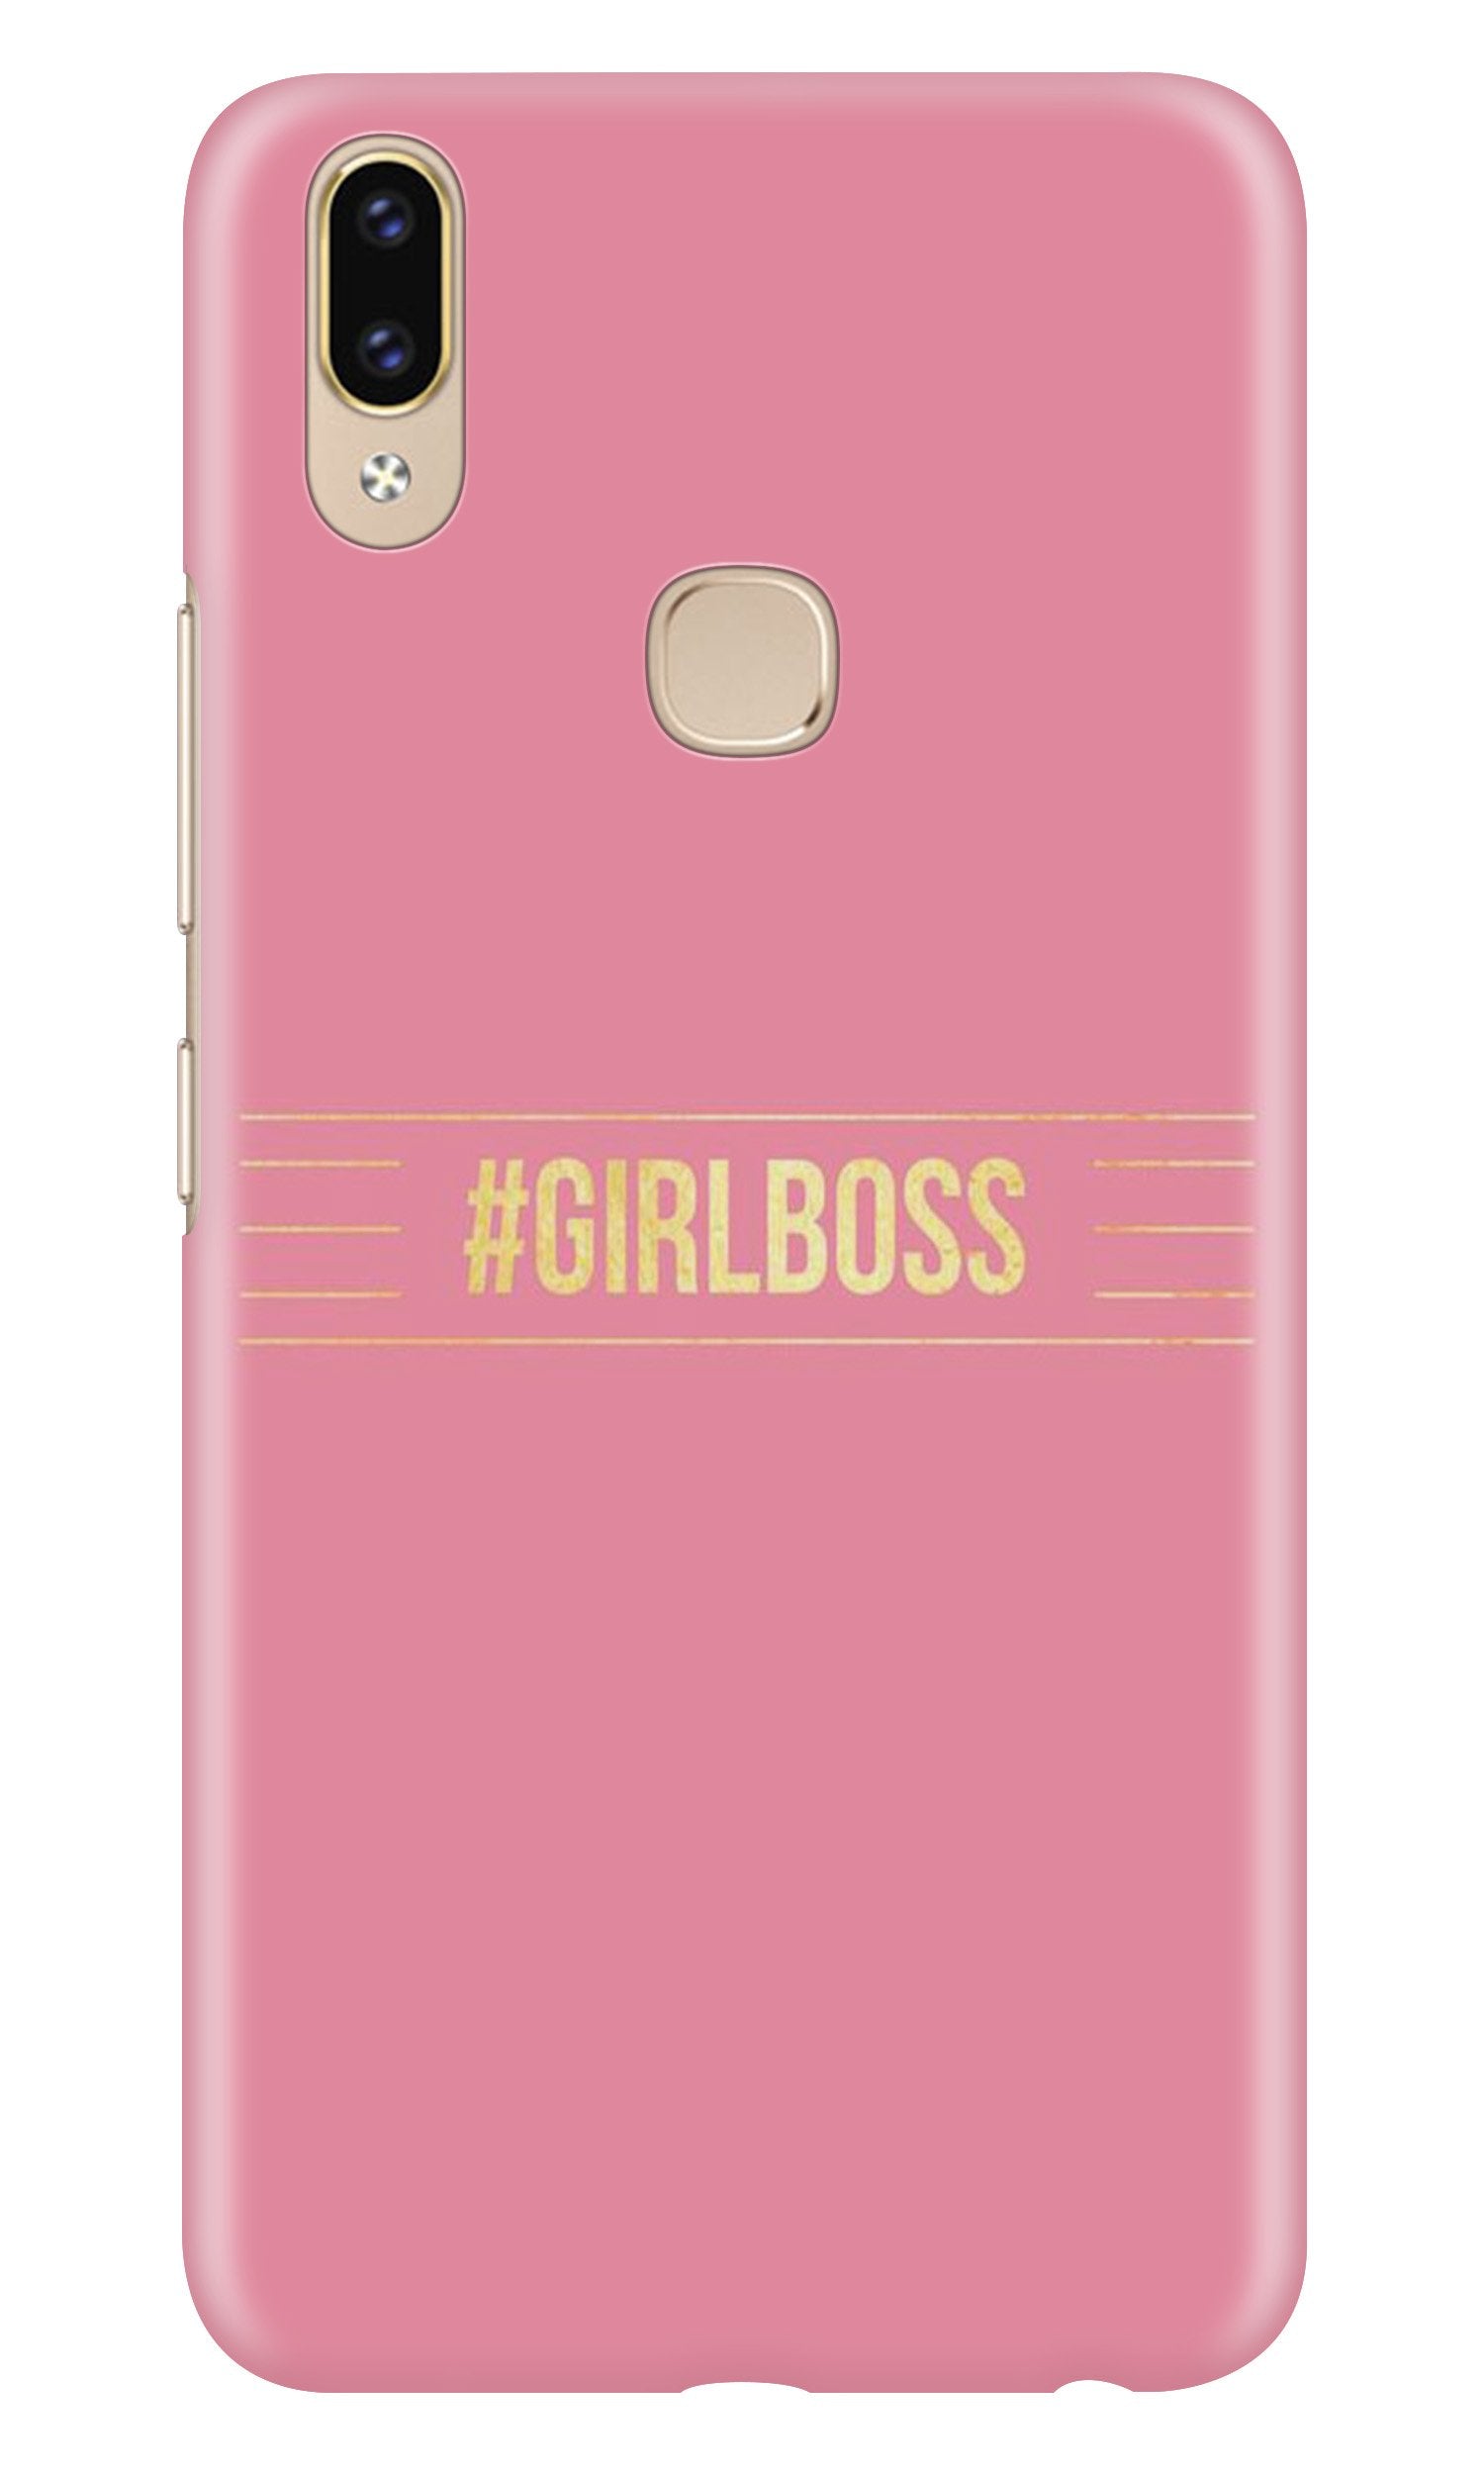 Girl Boss Pink Case for Asus Zenfone Max Pro M2 (Design No. 263)